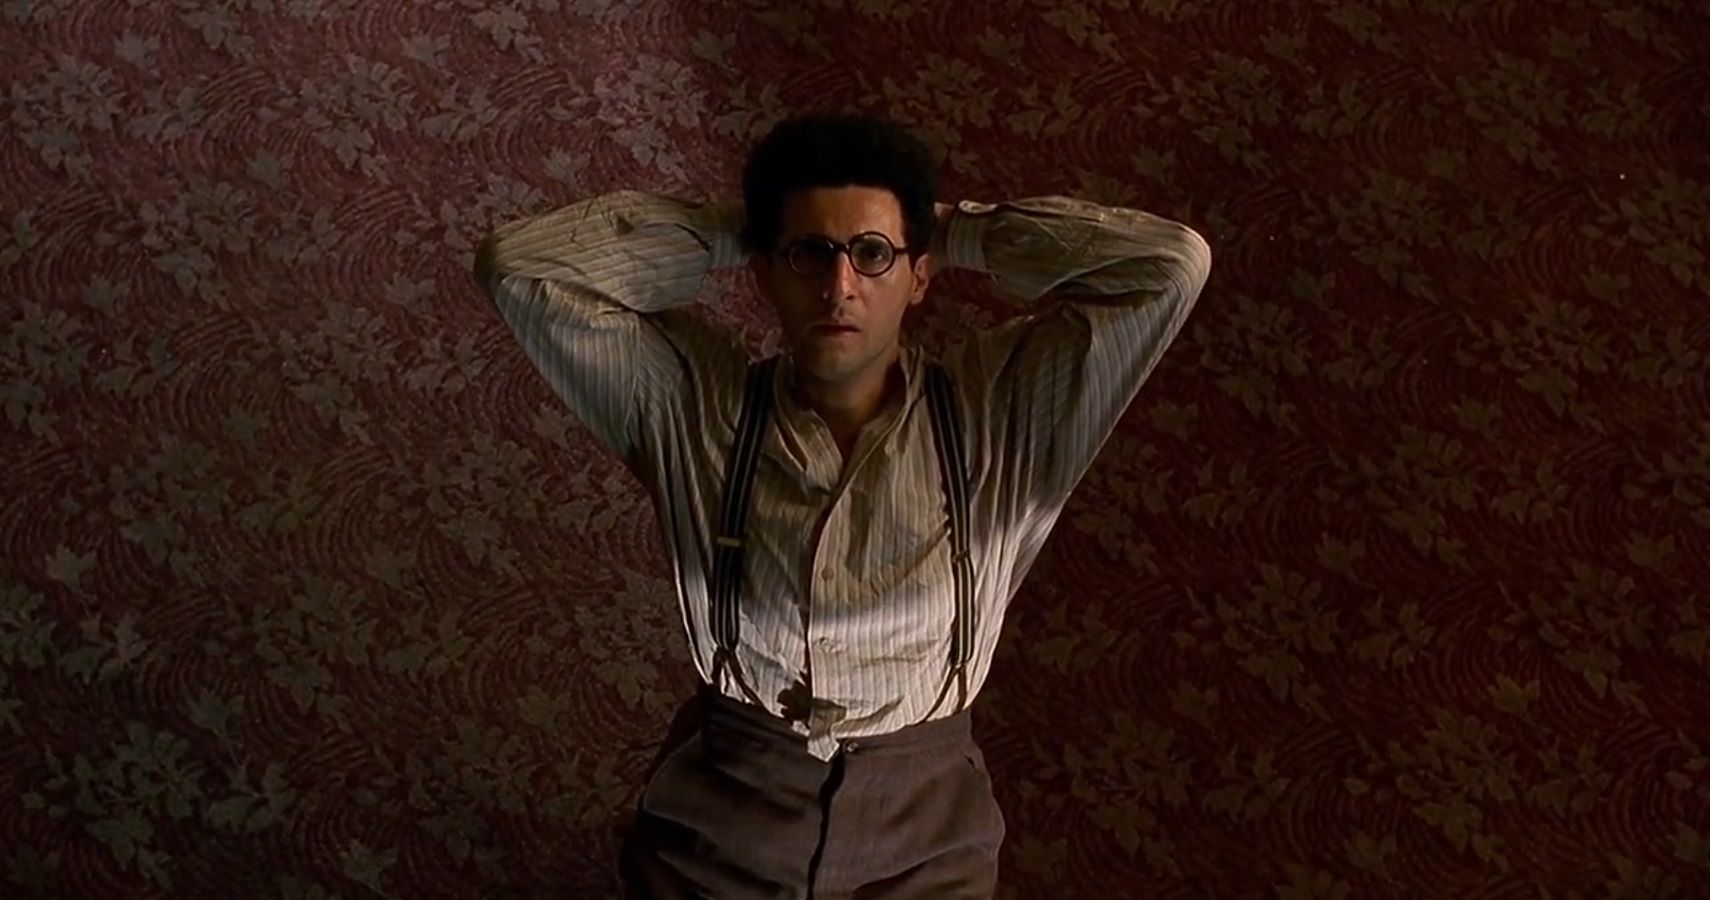 Facts You Didn't Know About The Coen Brothers' Barton Fink